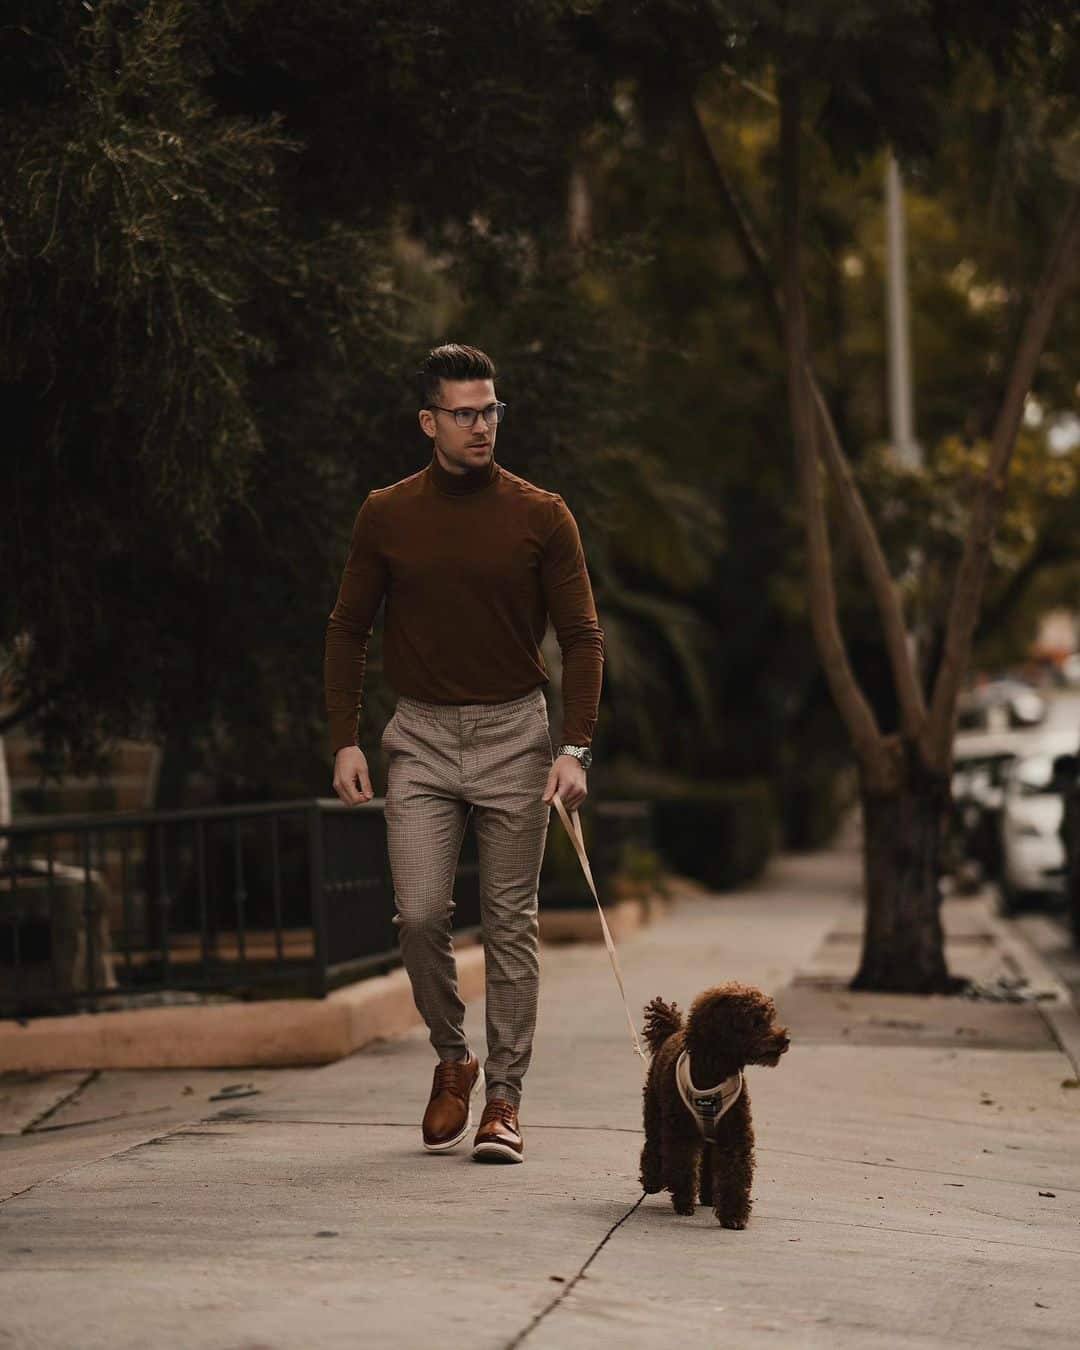 walking the dog in a casual outfit